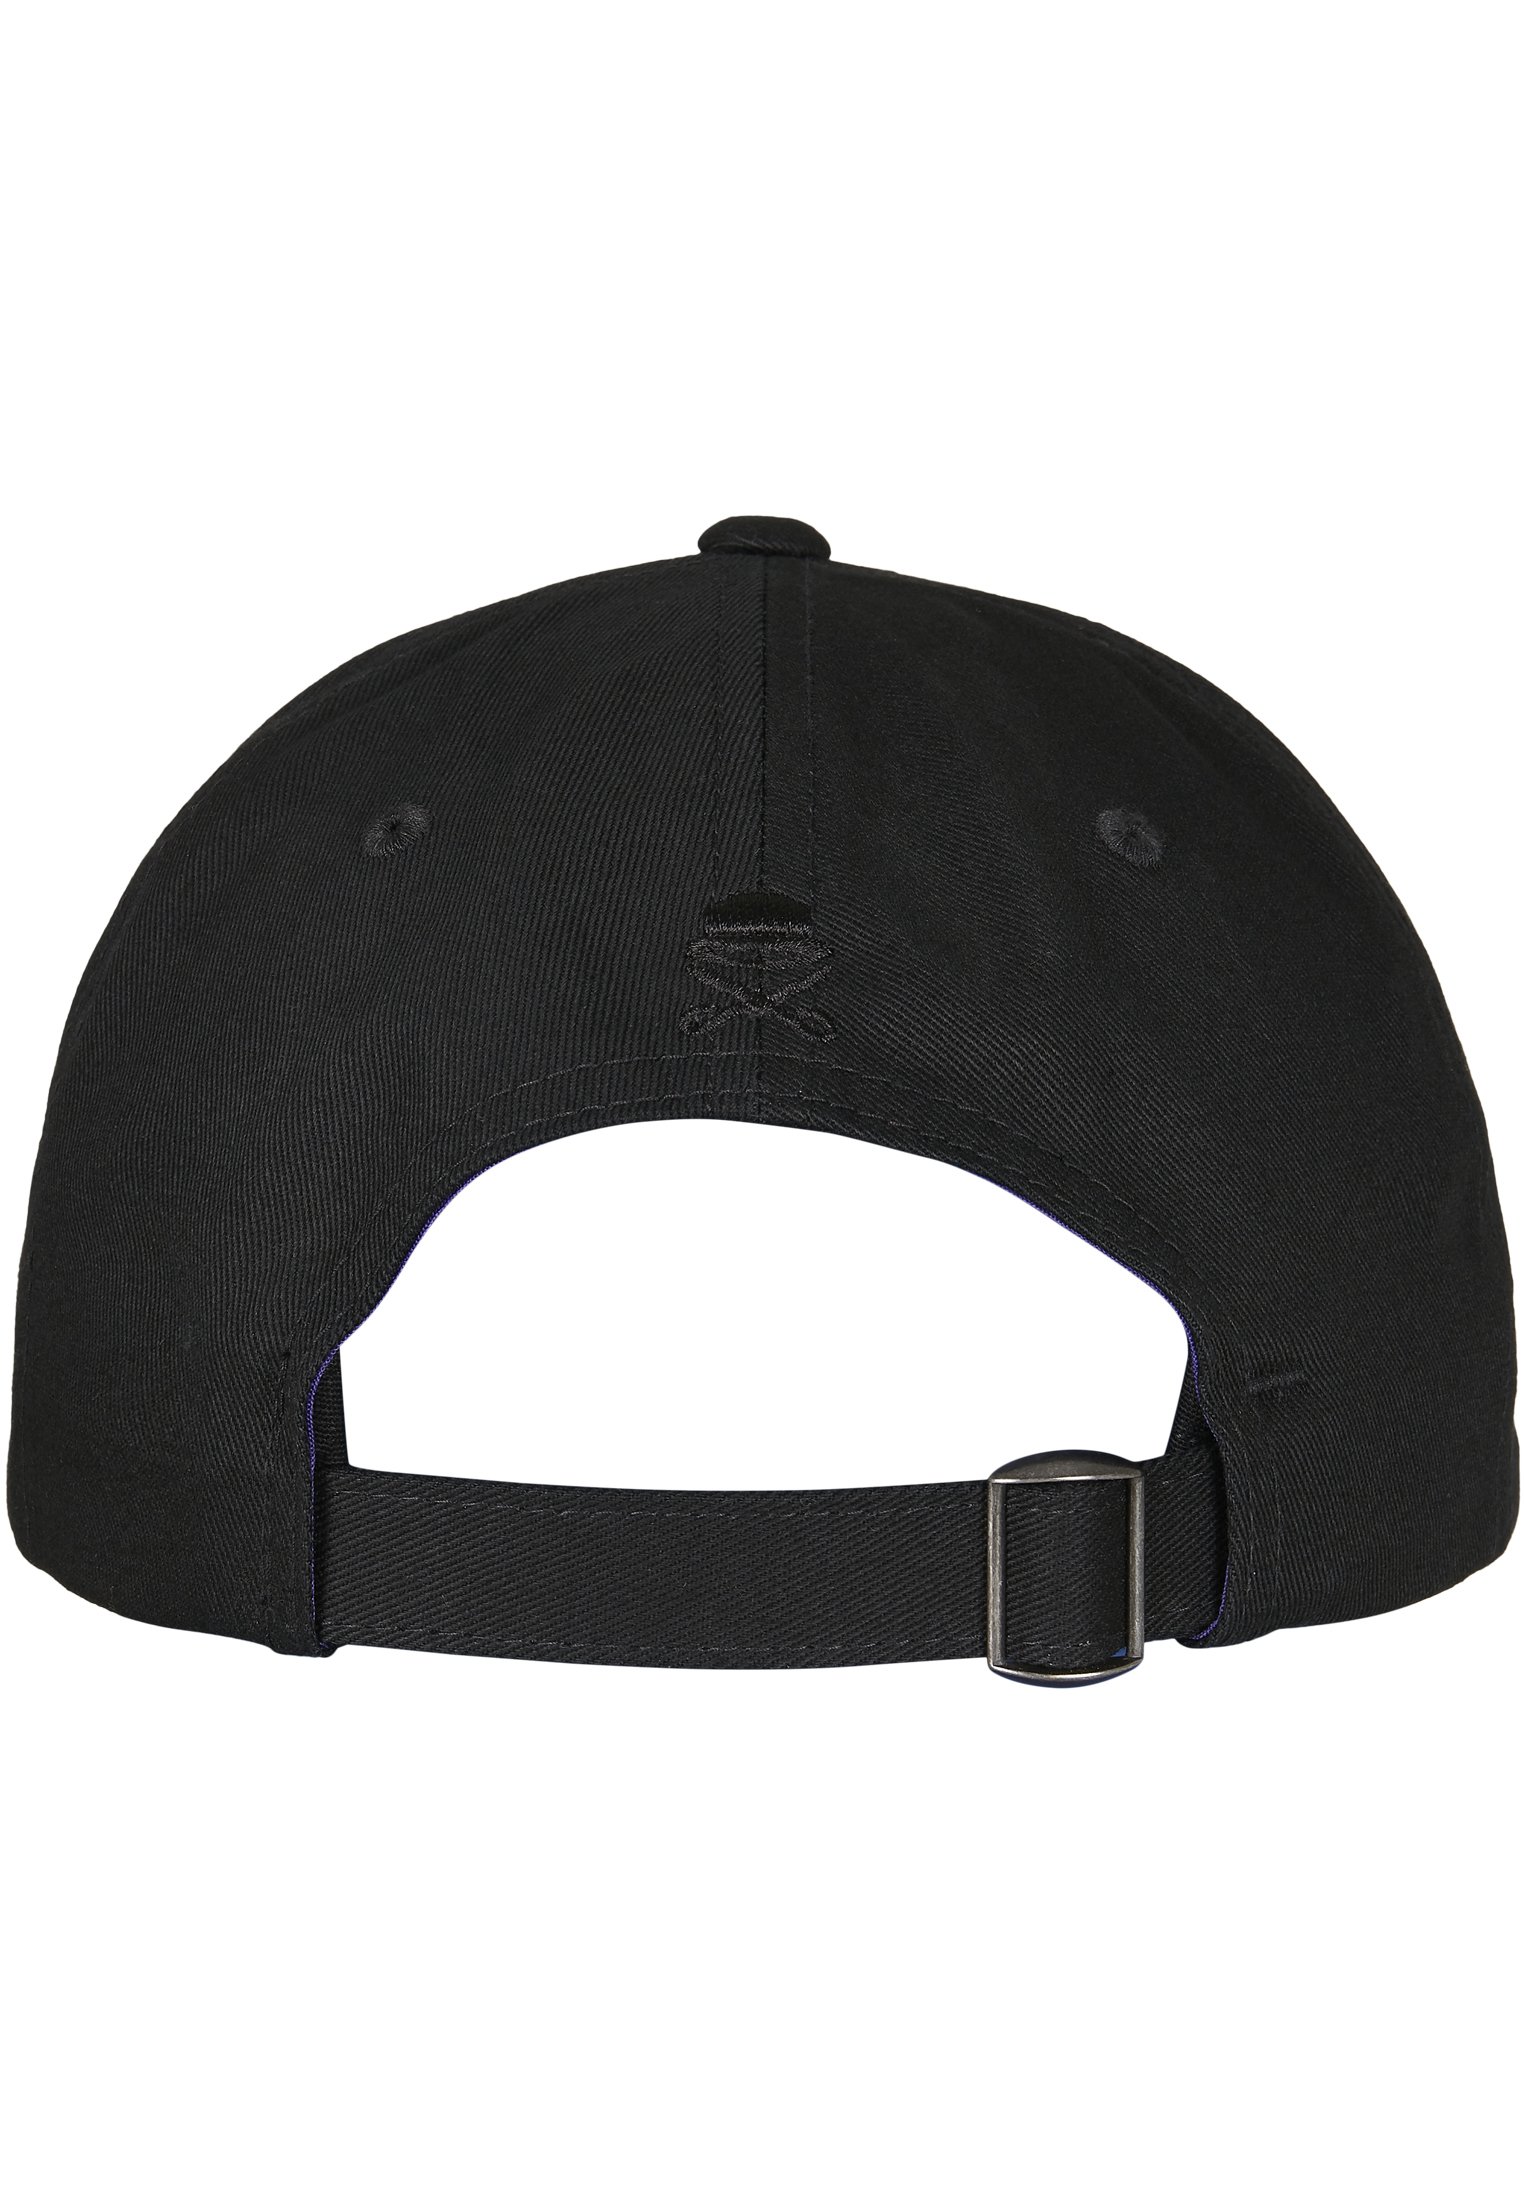 C&S WL Ride Or Fly Curved Cap black/mc one size